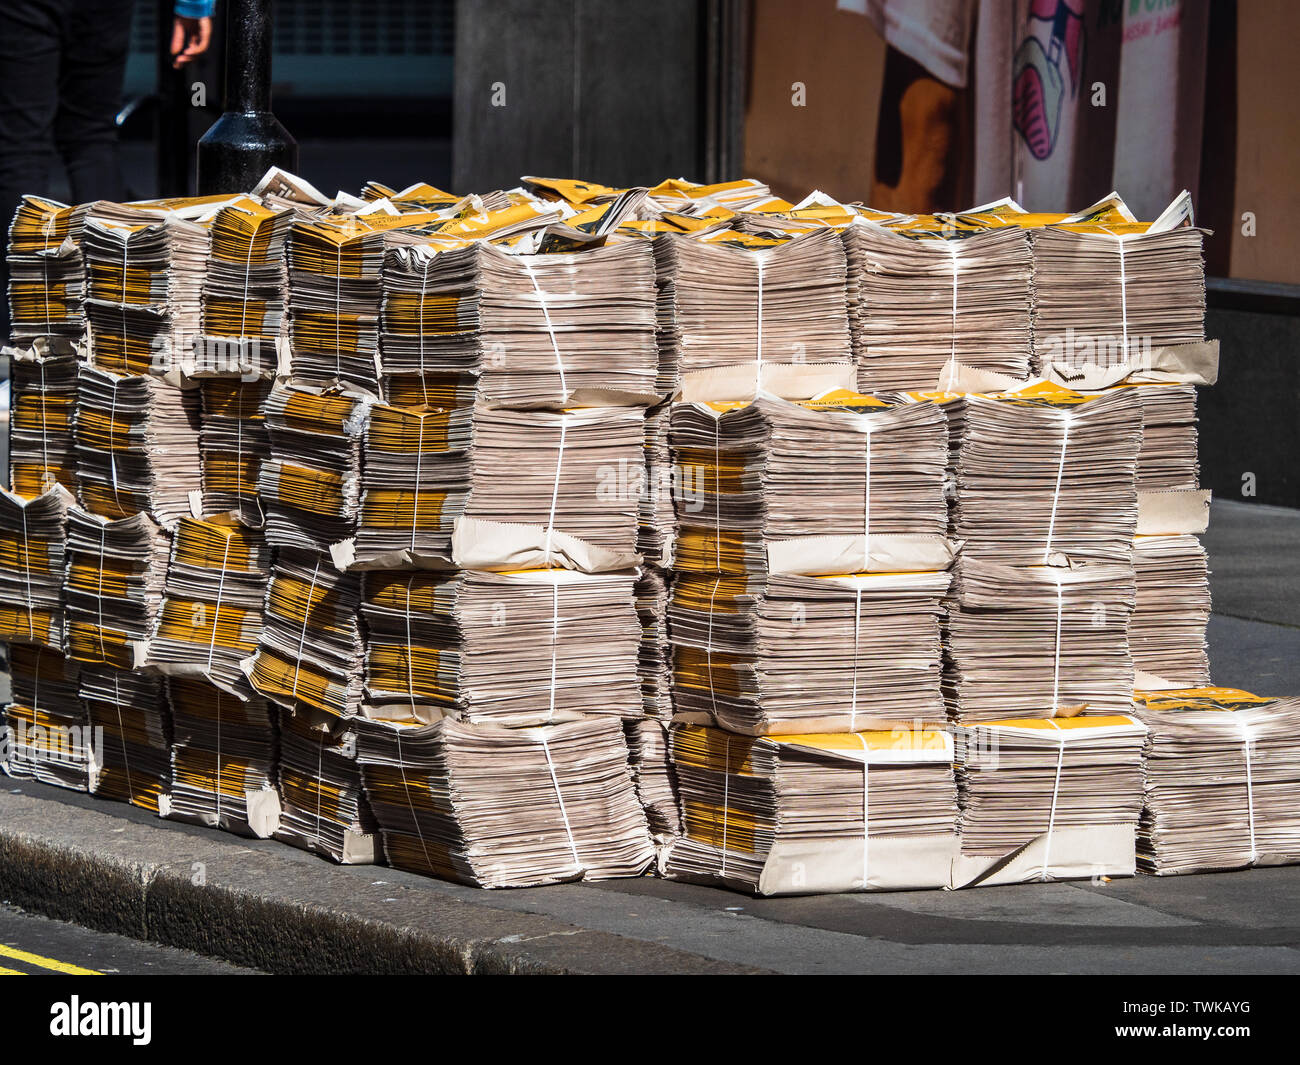 Evening Standard newspapers bundled for distribution in London. Pile of Newspapers. Stock Photo